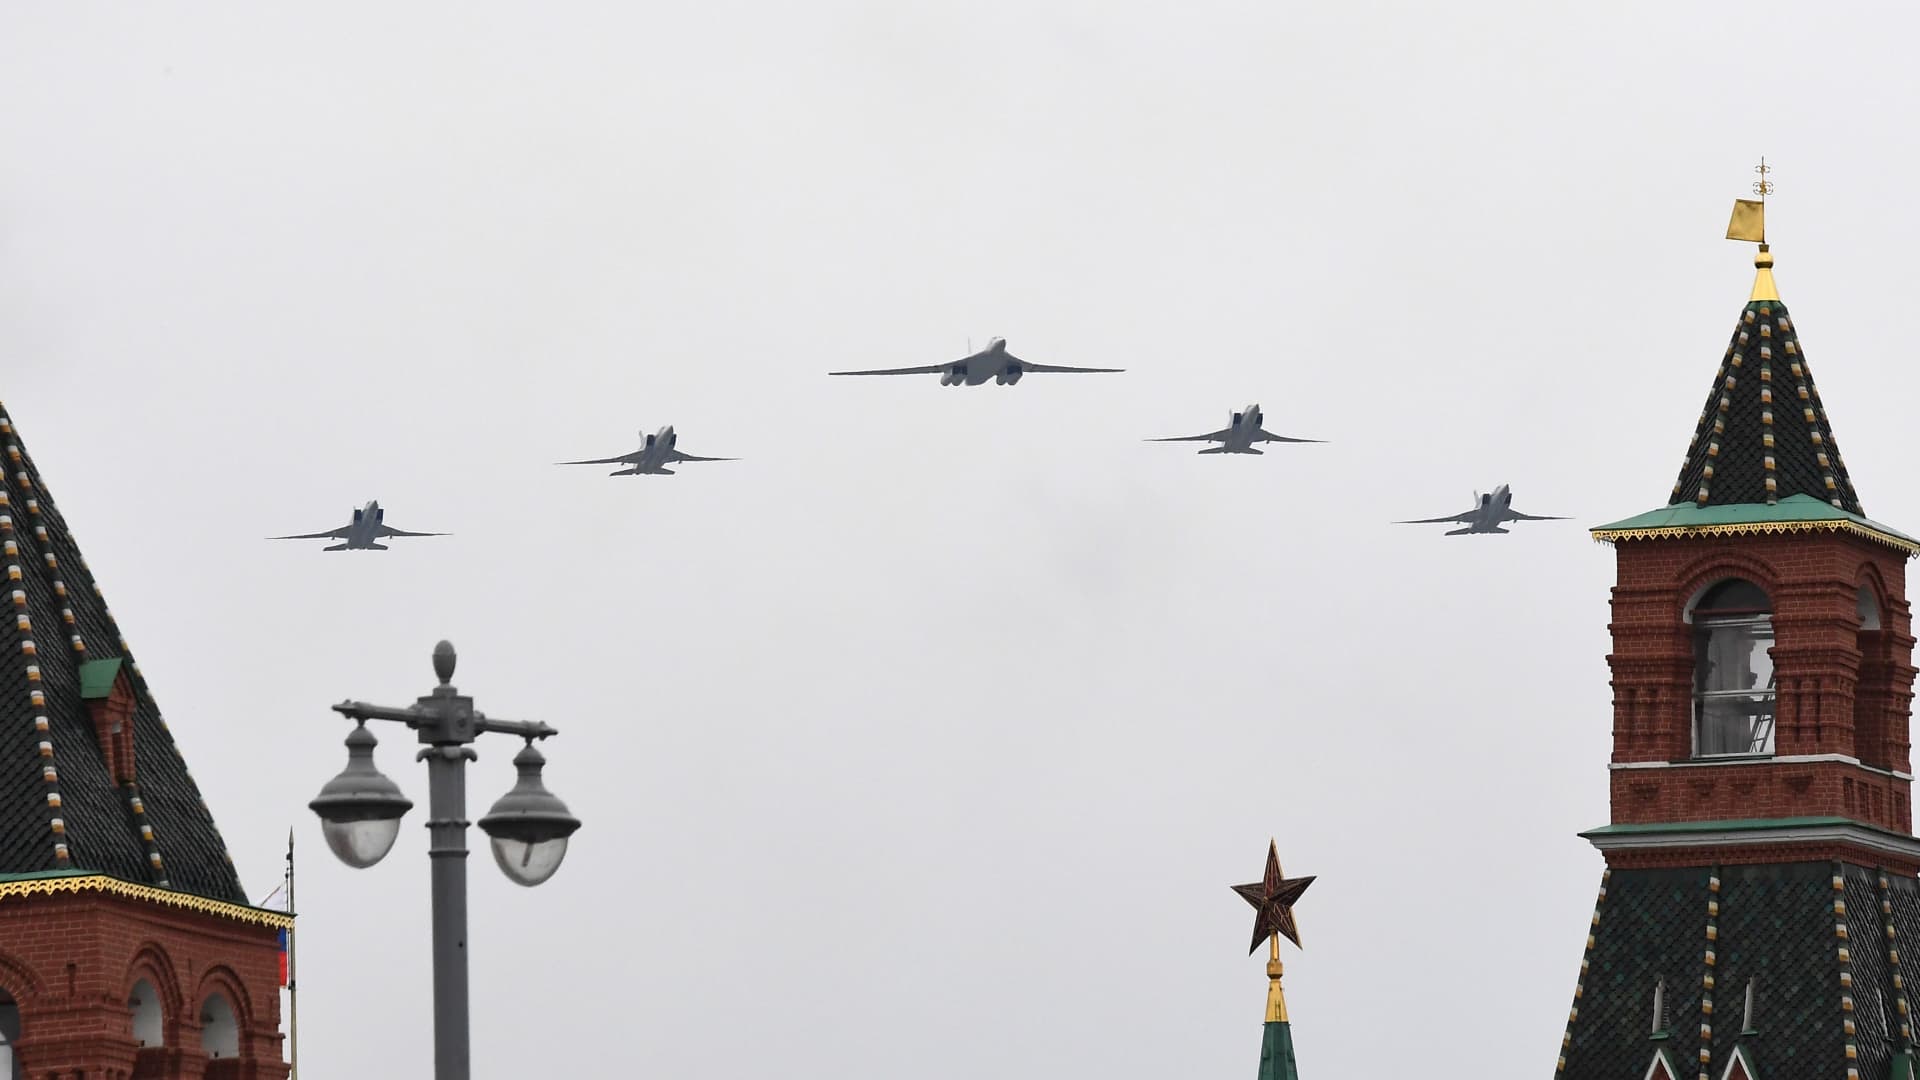 A Tupolev Tu-160 and Tu-22M3 military aircrafts fly over the Kremlin and Red Square in downtown Moscow to mark the 75th anniversary of the victory over Nazi Germany in World War Two, May 9, 2020.